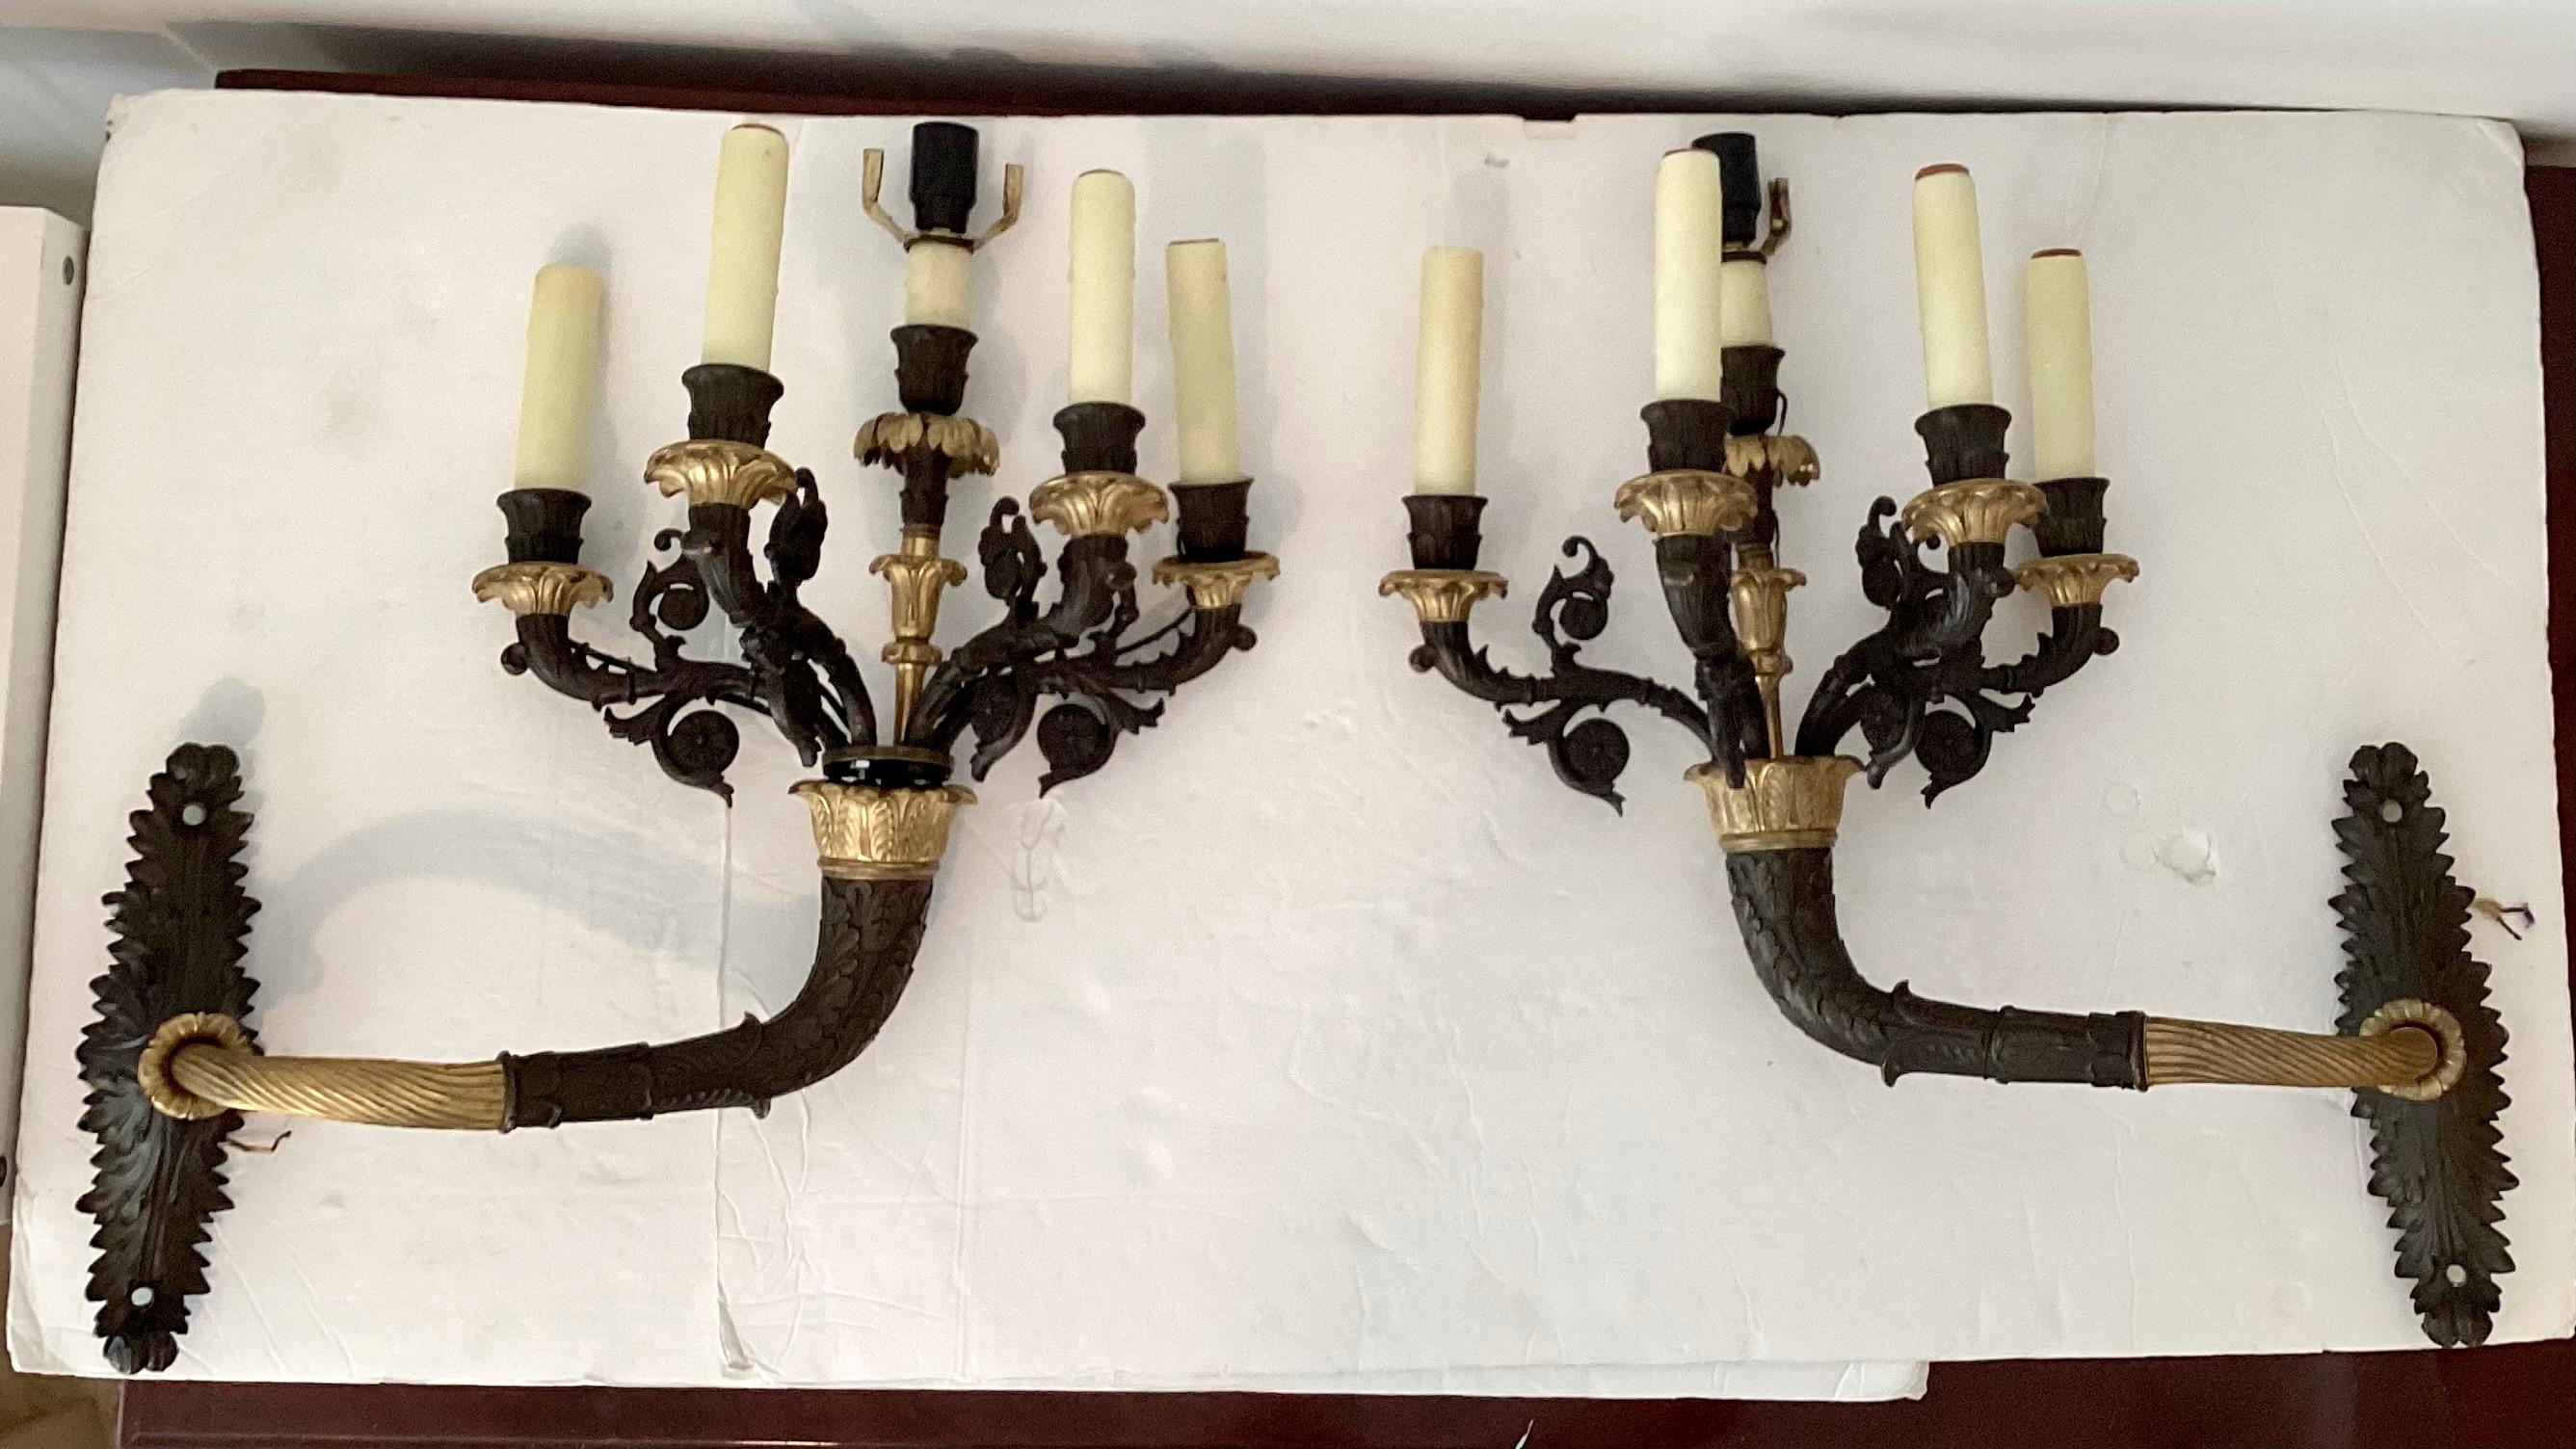 Pair of French wall sconces. One of the sconces needs repair, selling as is. Add some amazing French style to your home.